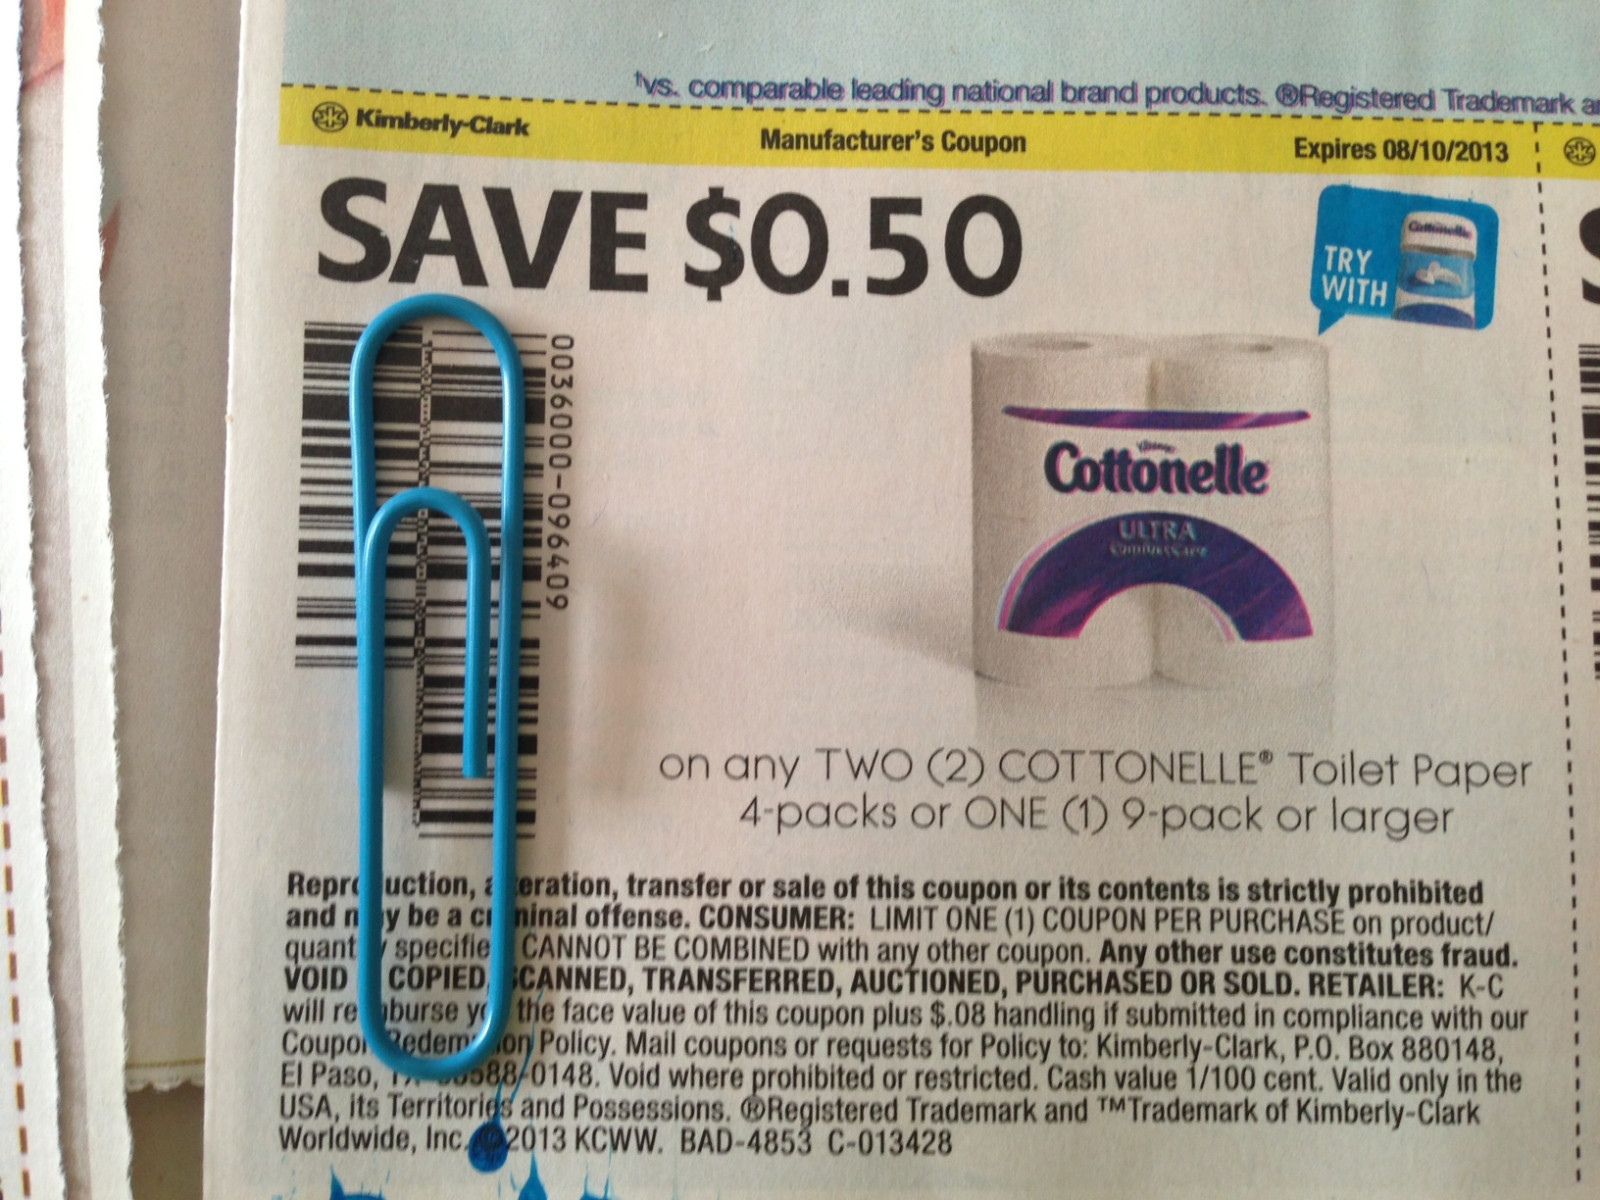 Save $0.50 on any TWO (2) Cottonelle Toilet Paper 4 packs or ONE (1) 9 pack or larger Expires 8-10-2013